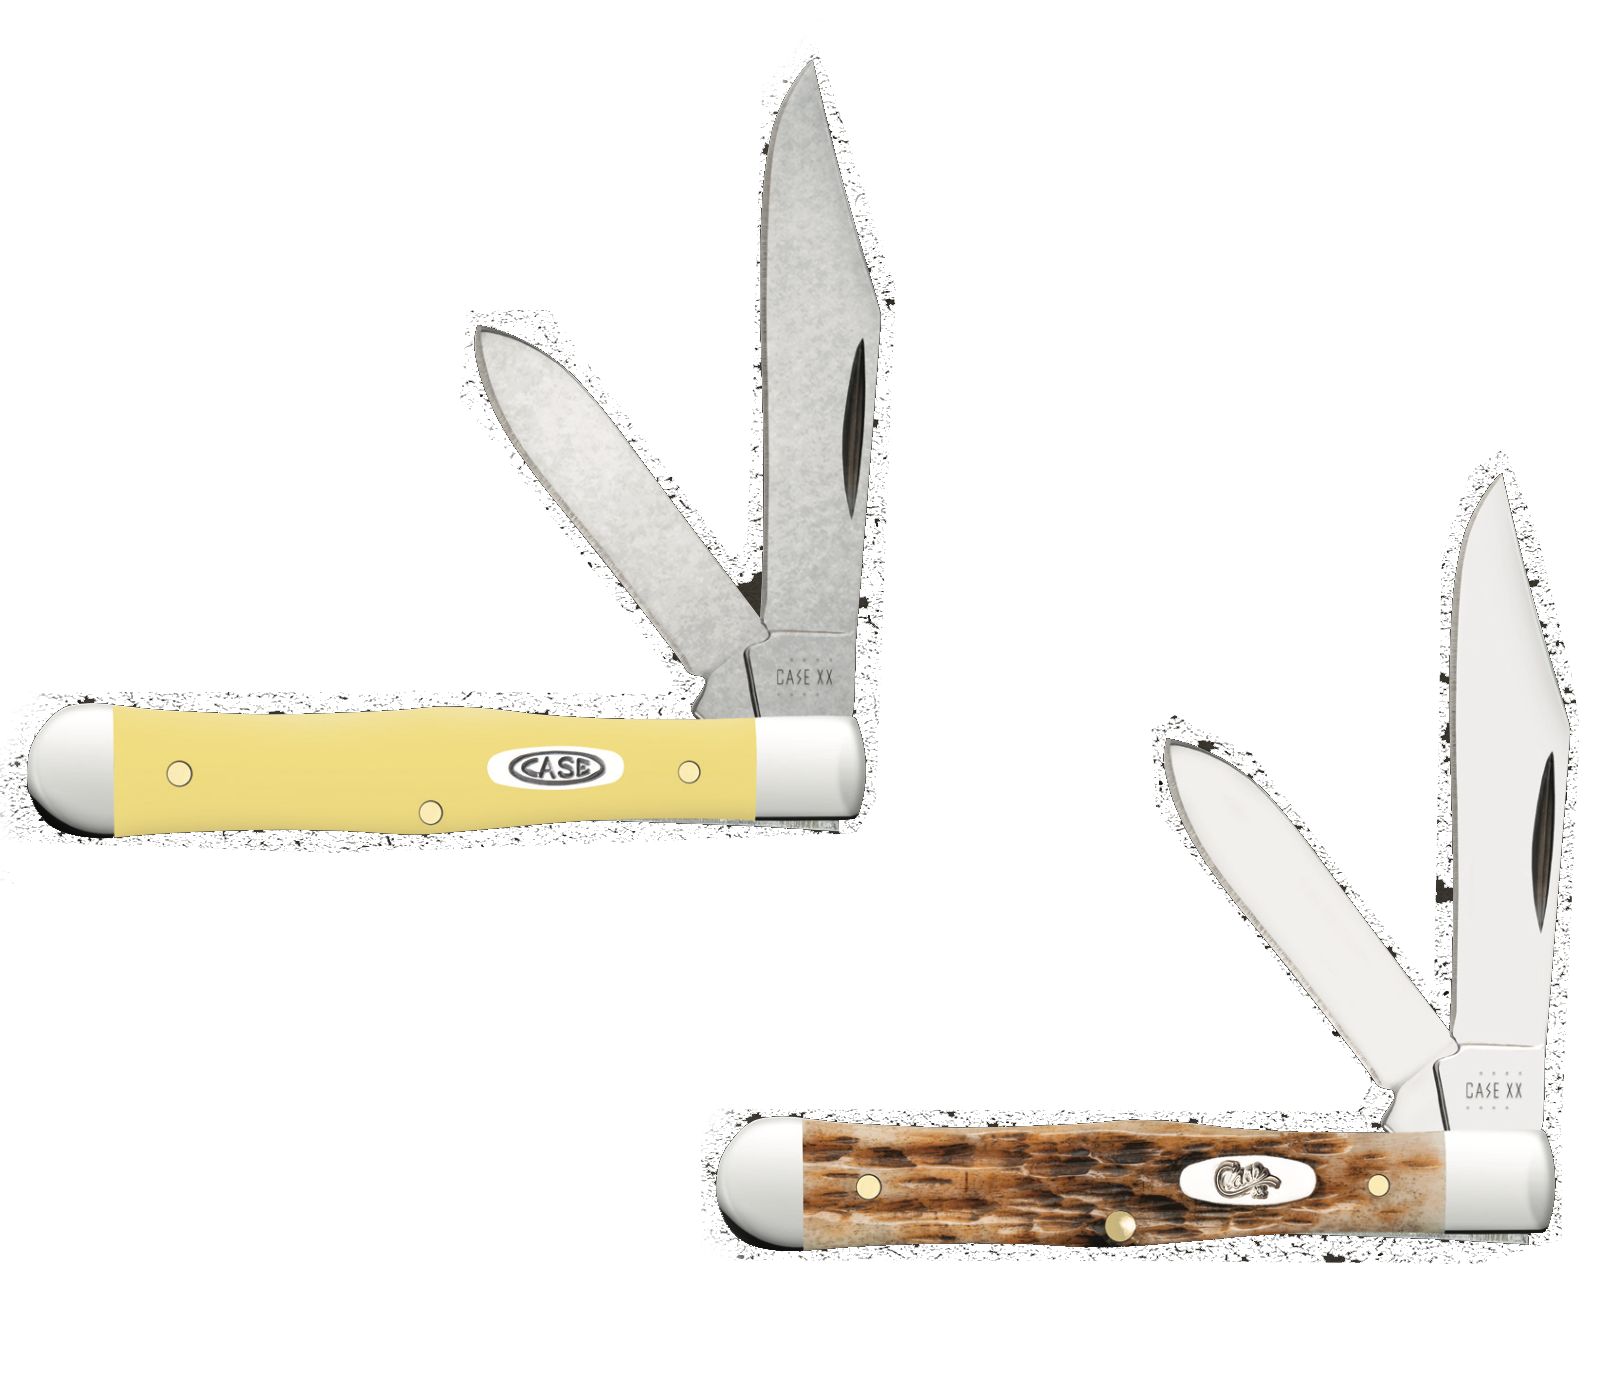 Two Swell Center Jack knives.